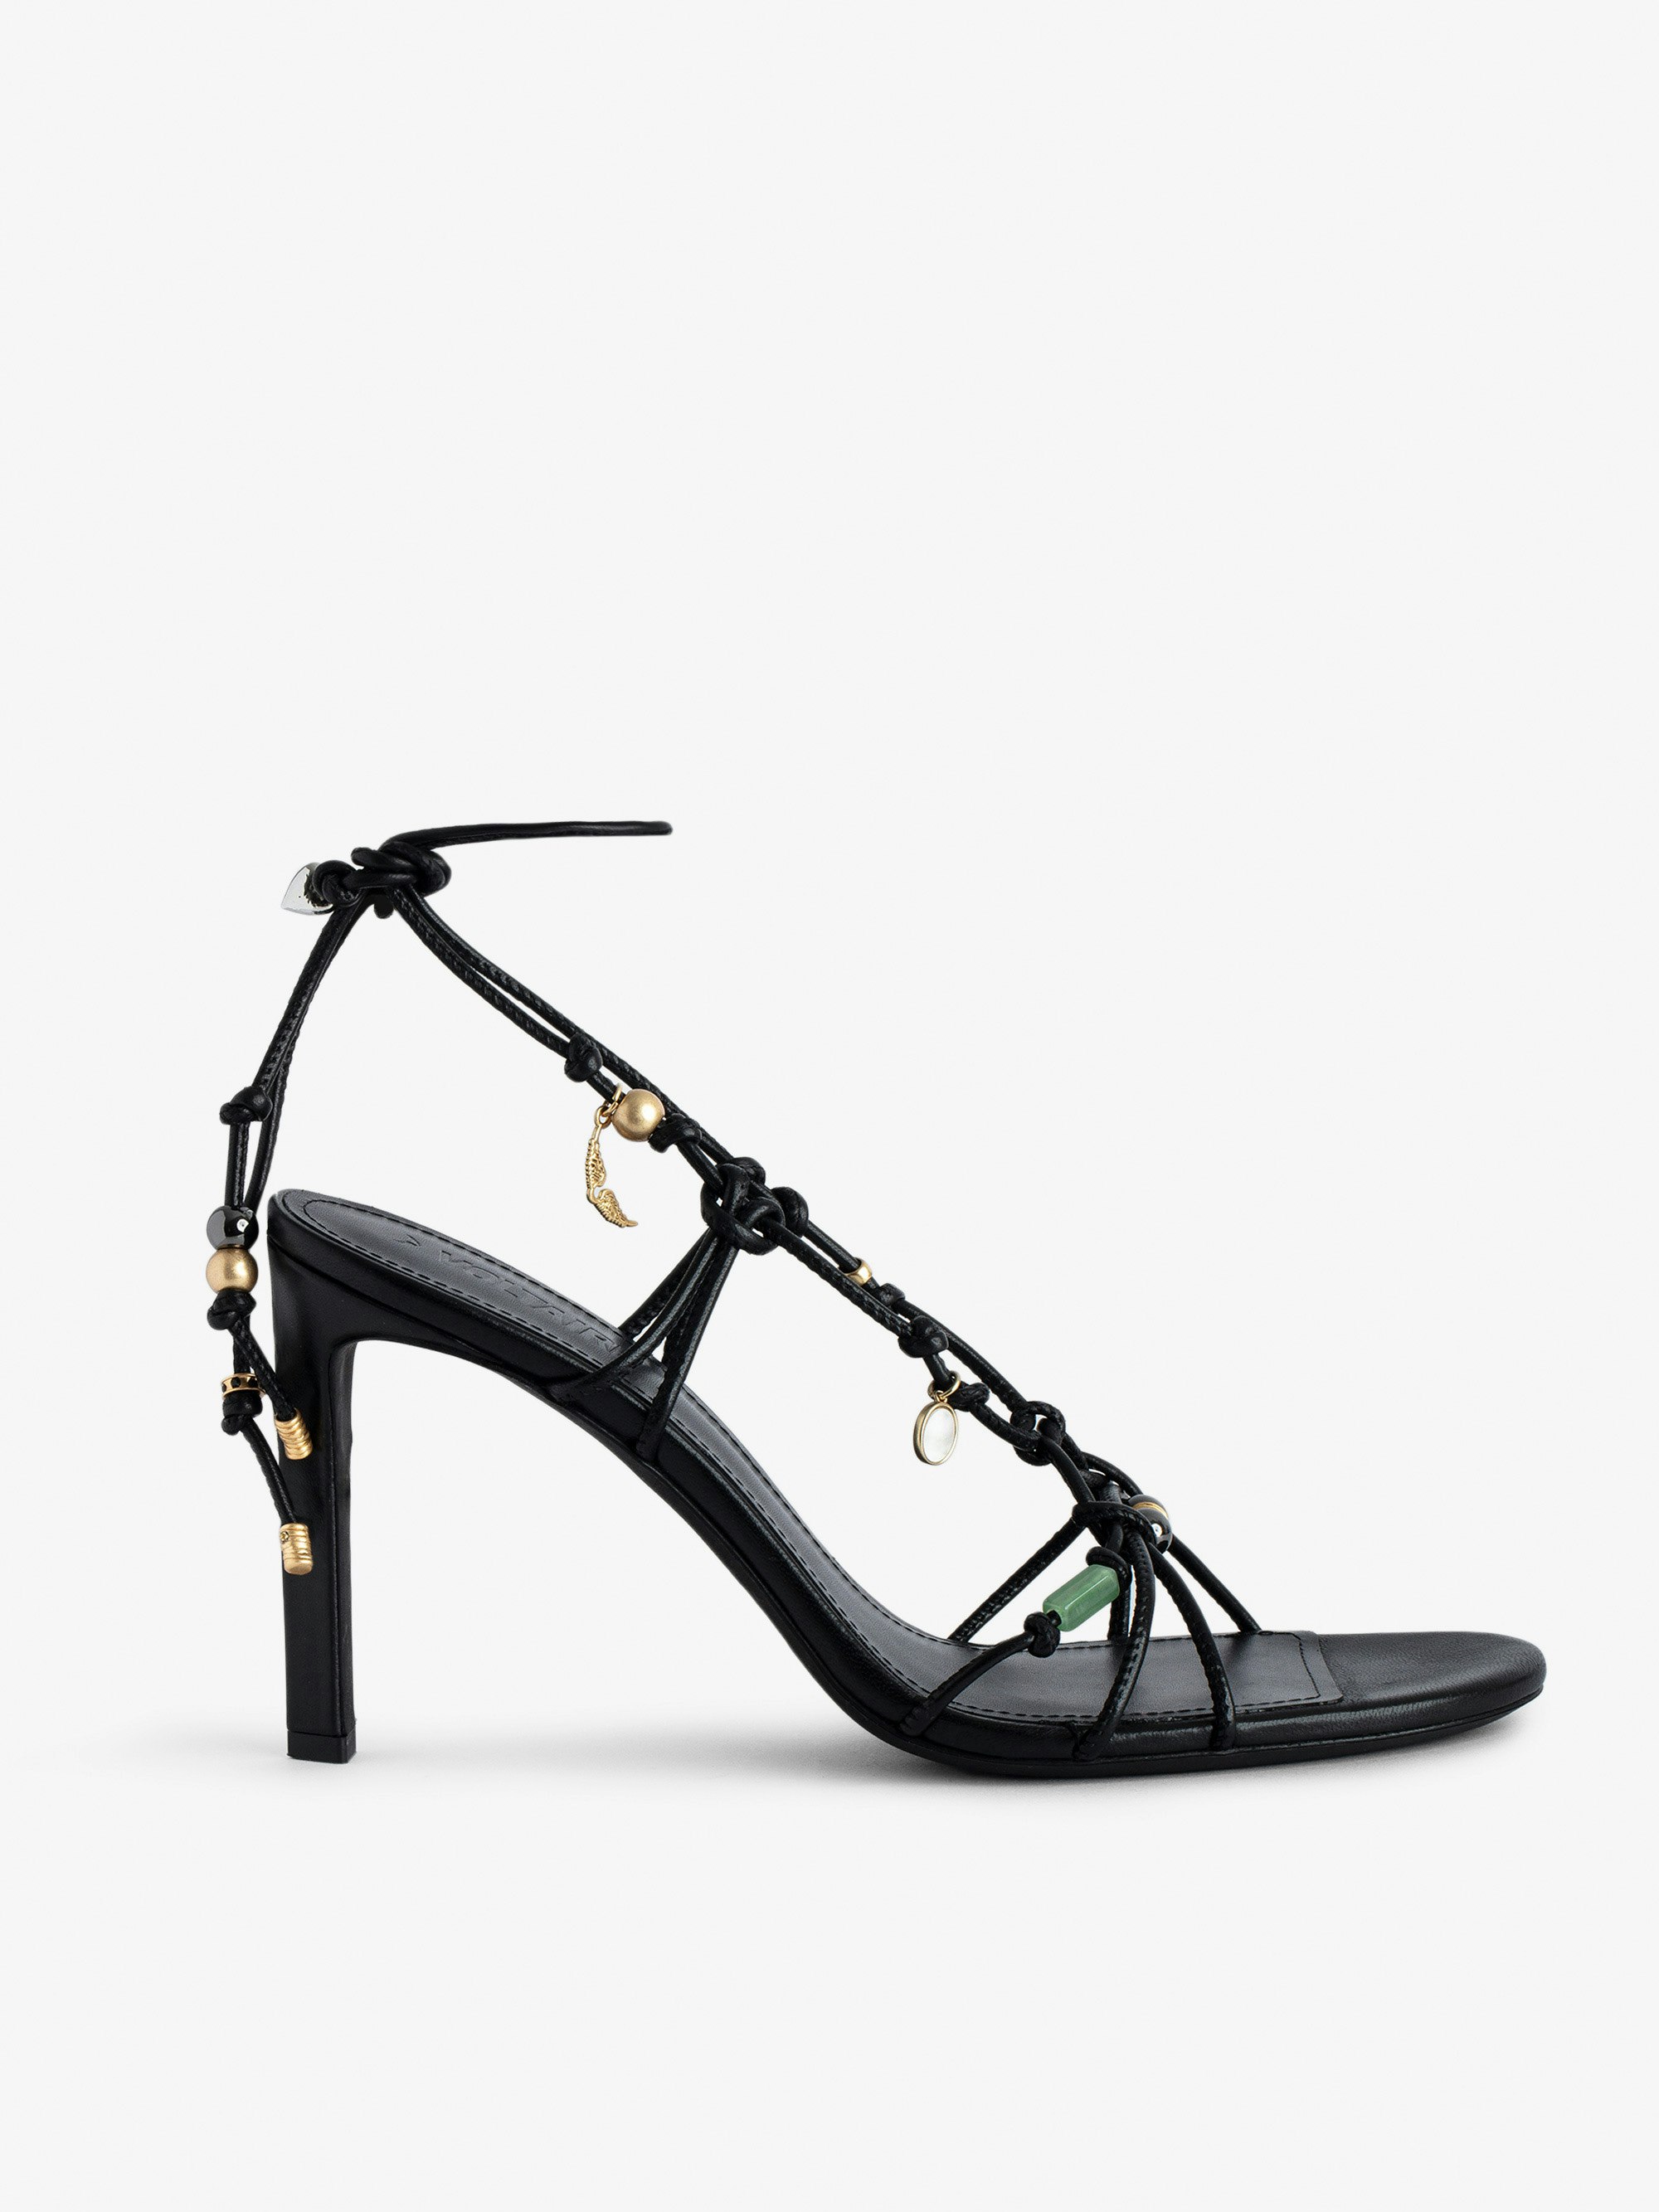 Alana Sandals - Women's black smooth leather heeled sandals with tied straps and charms.